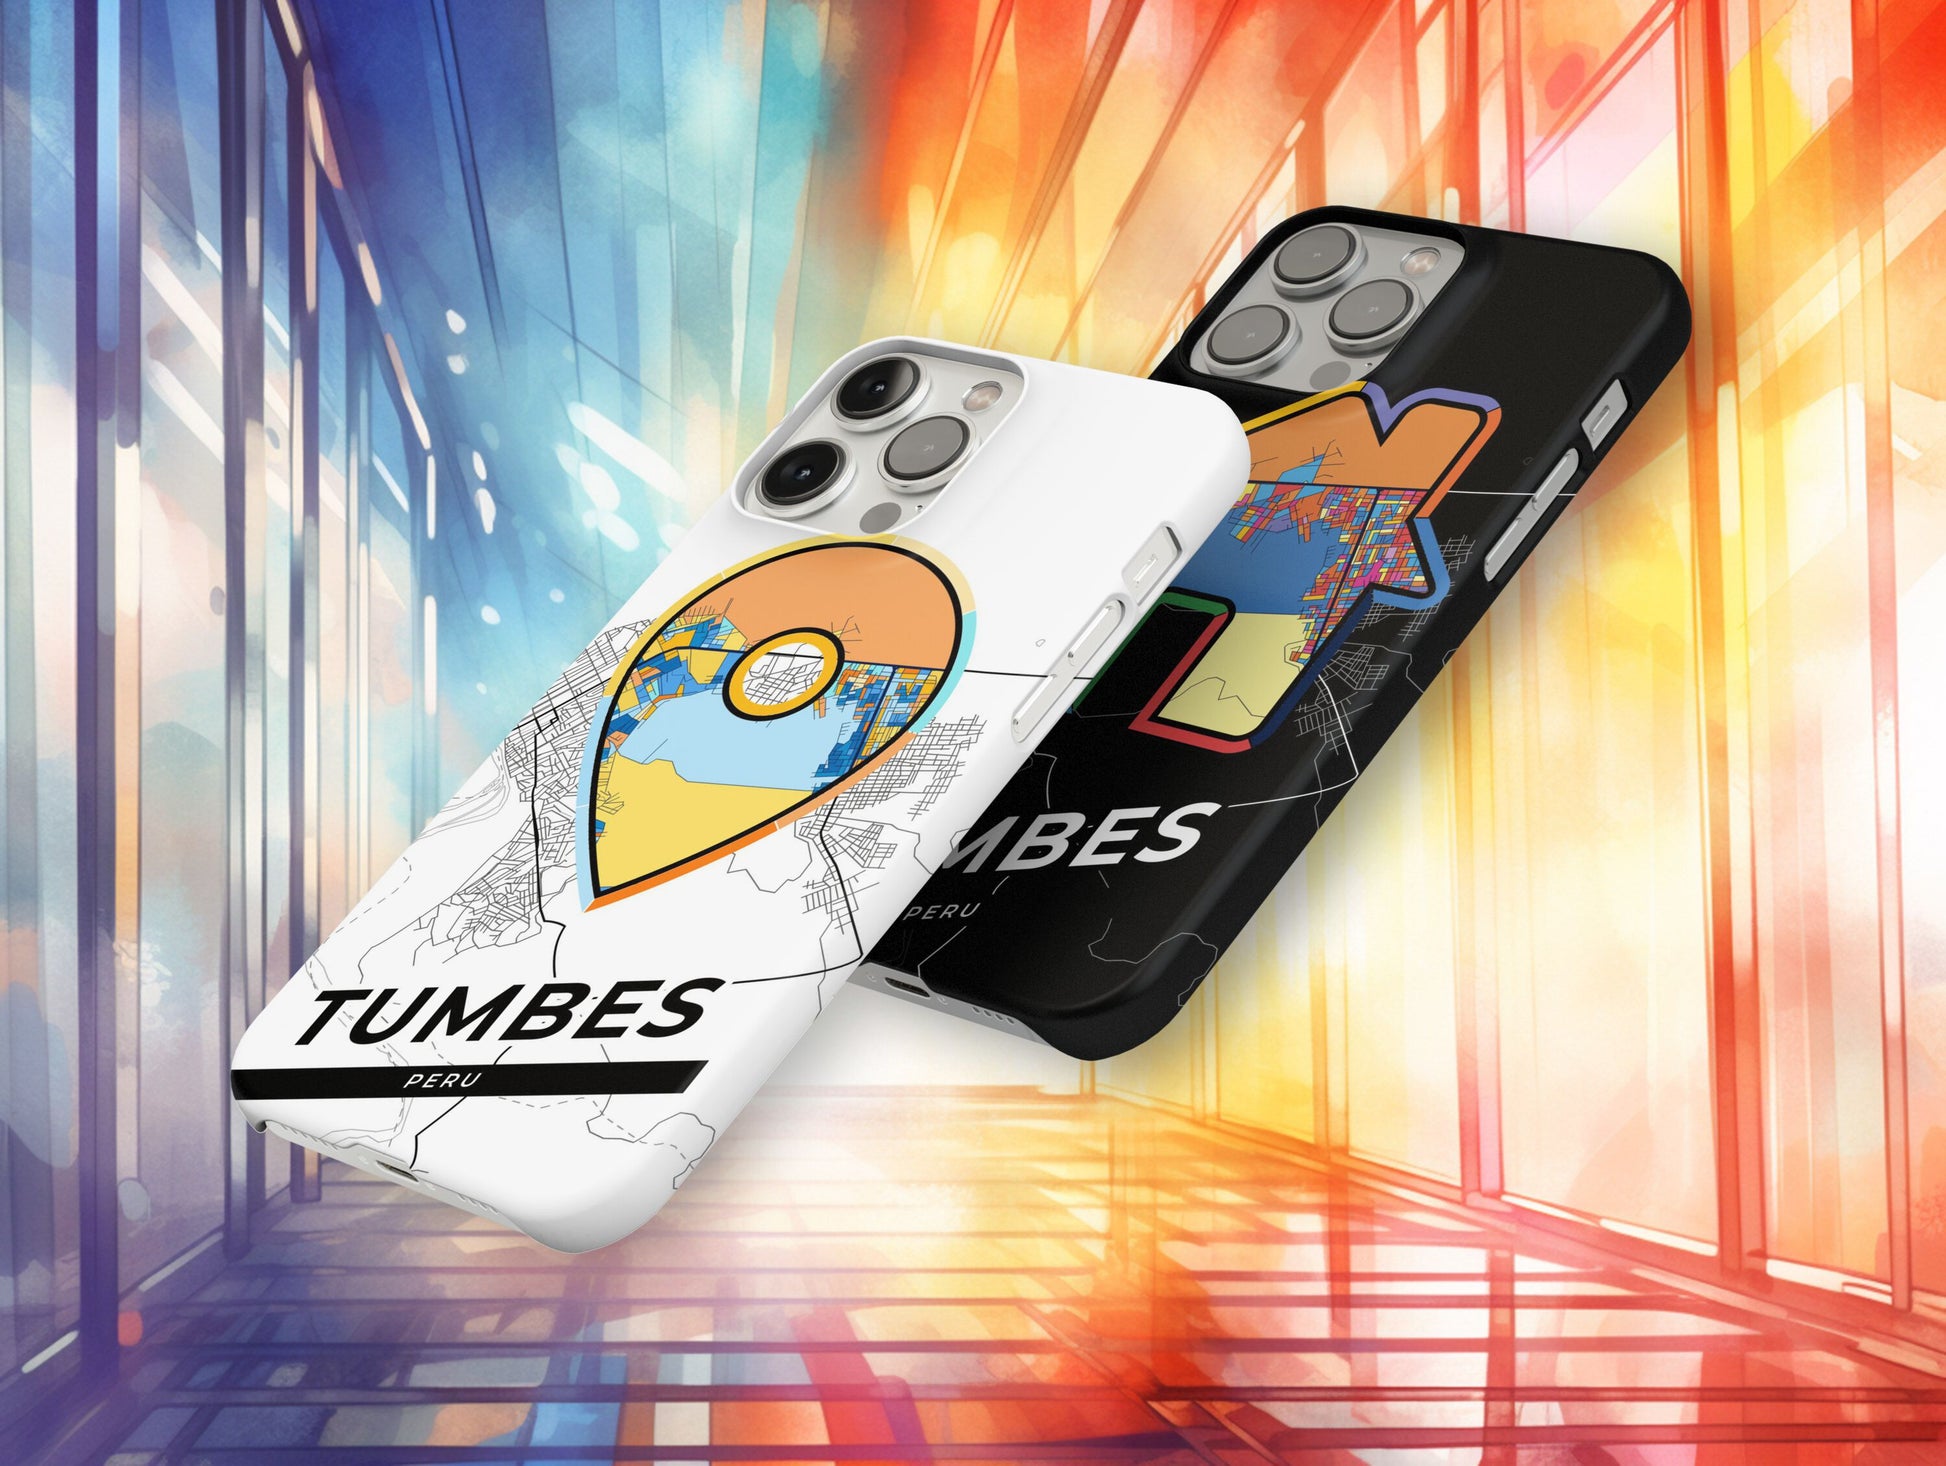 Tumbes Peru slim phone case with colorful icon. Birthday, wedding or housewarming gift. Couple match cases.